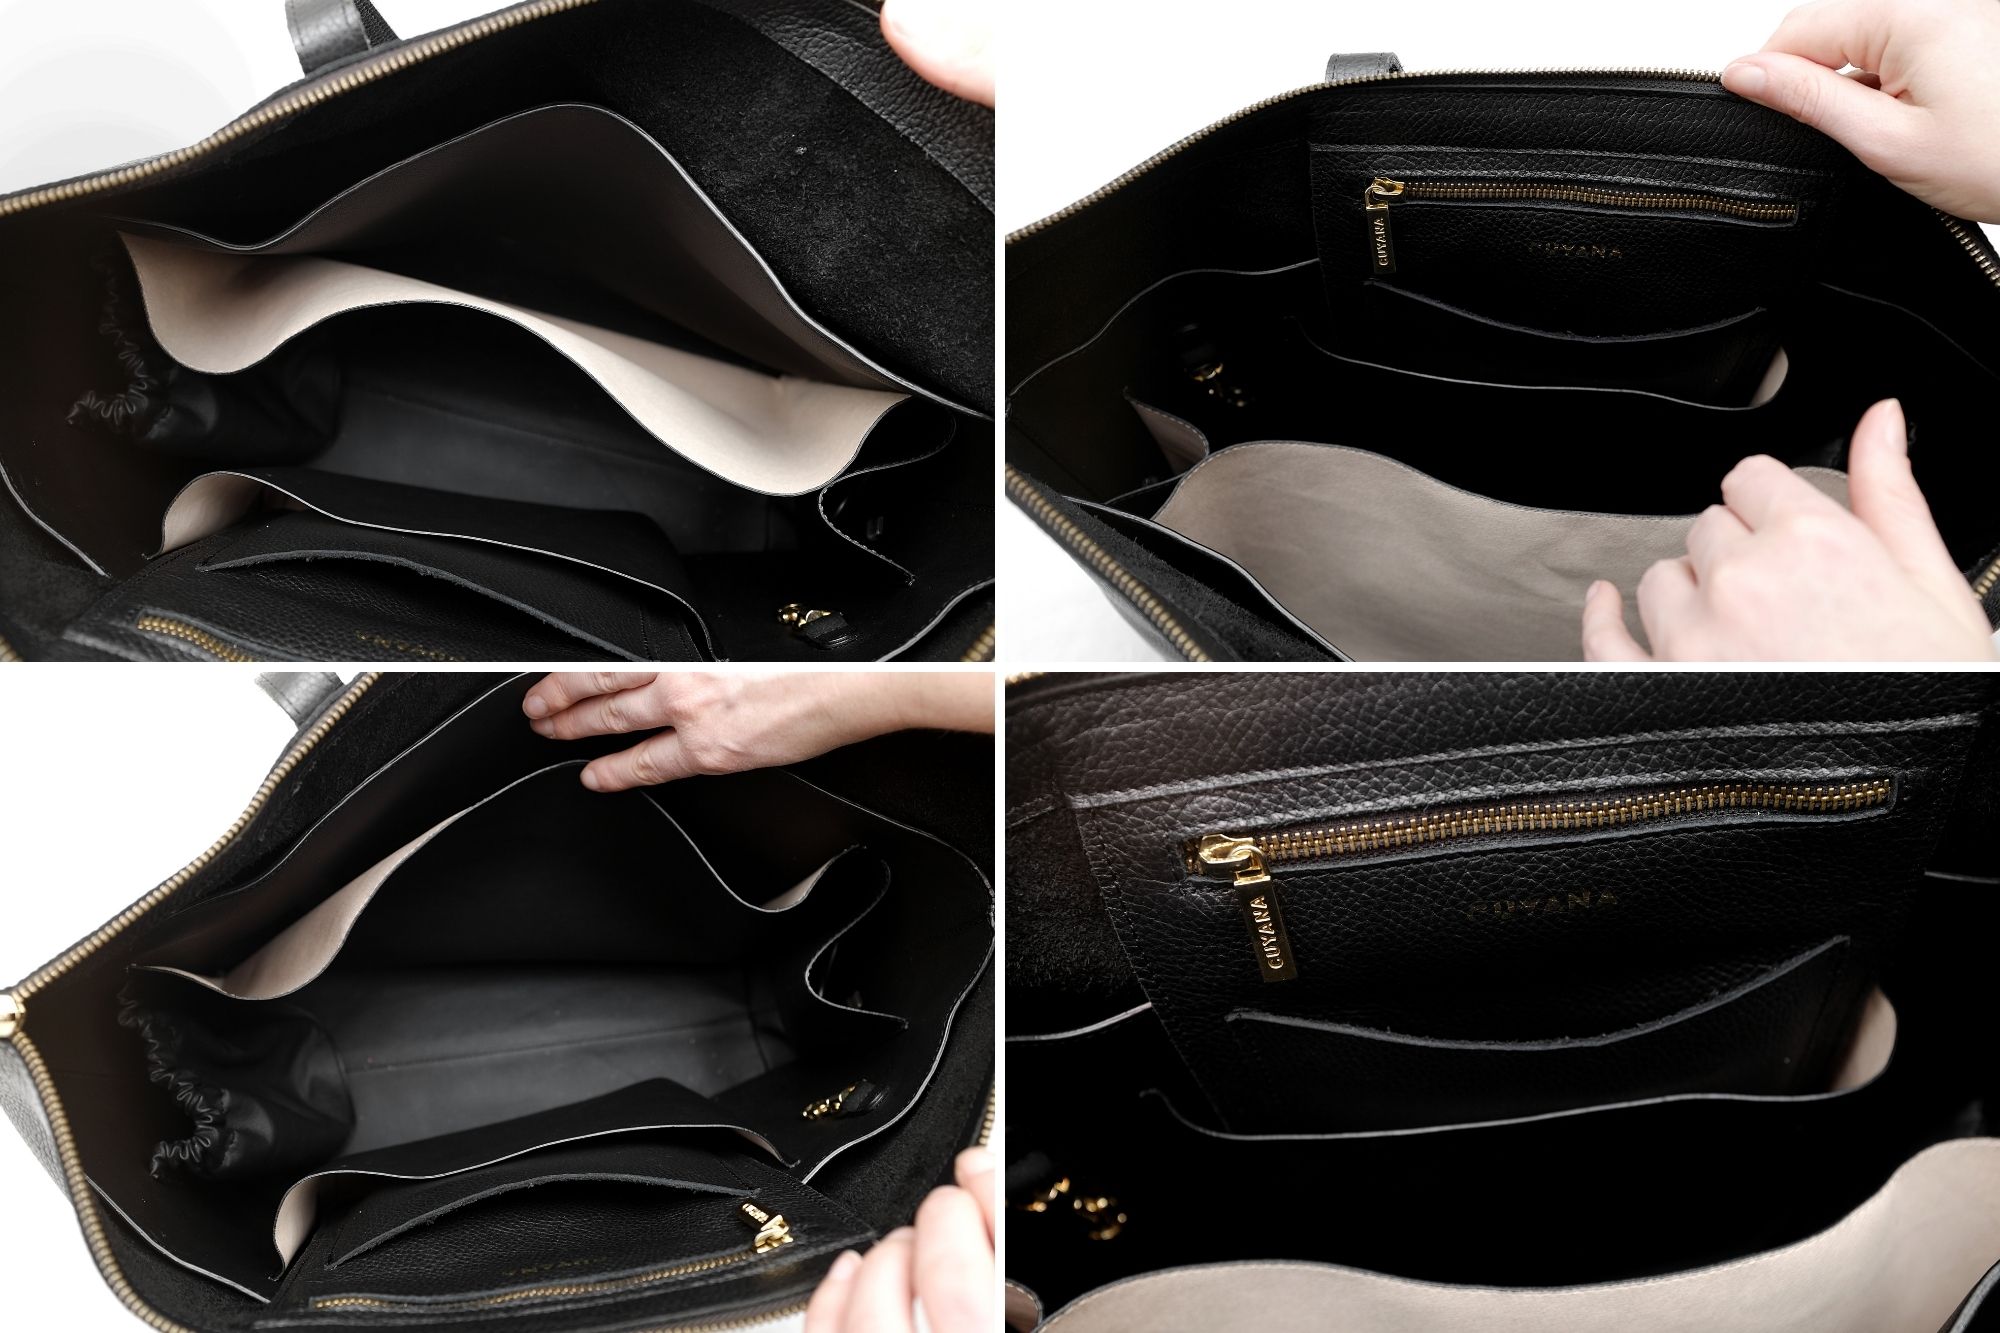 Cuyana Easy Tote Review: Here's How It Held Up on Two Back-to-Back Trips